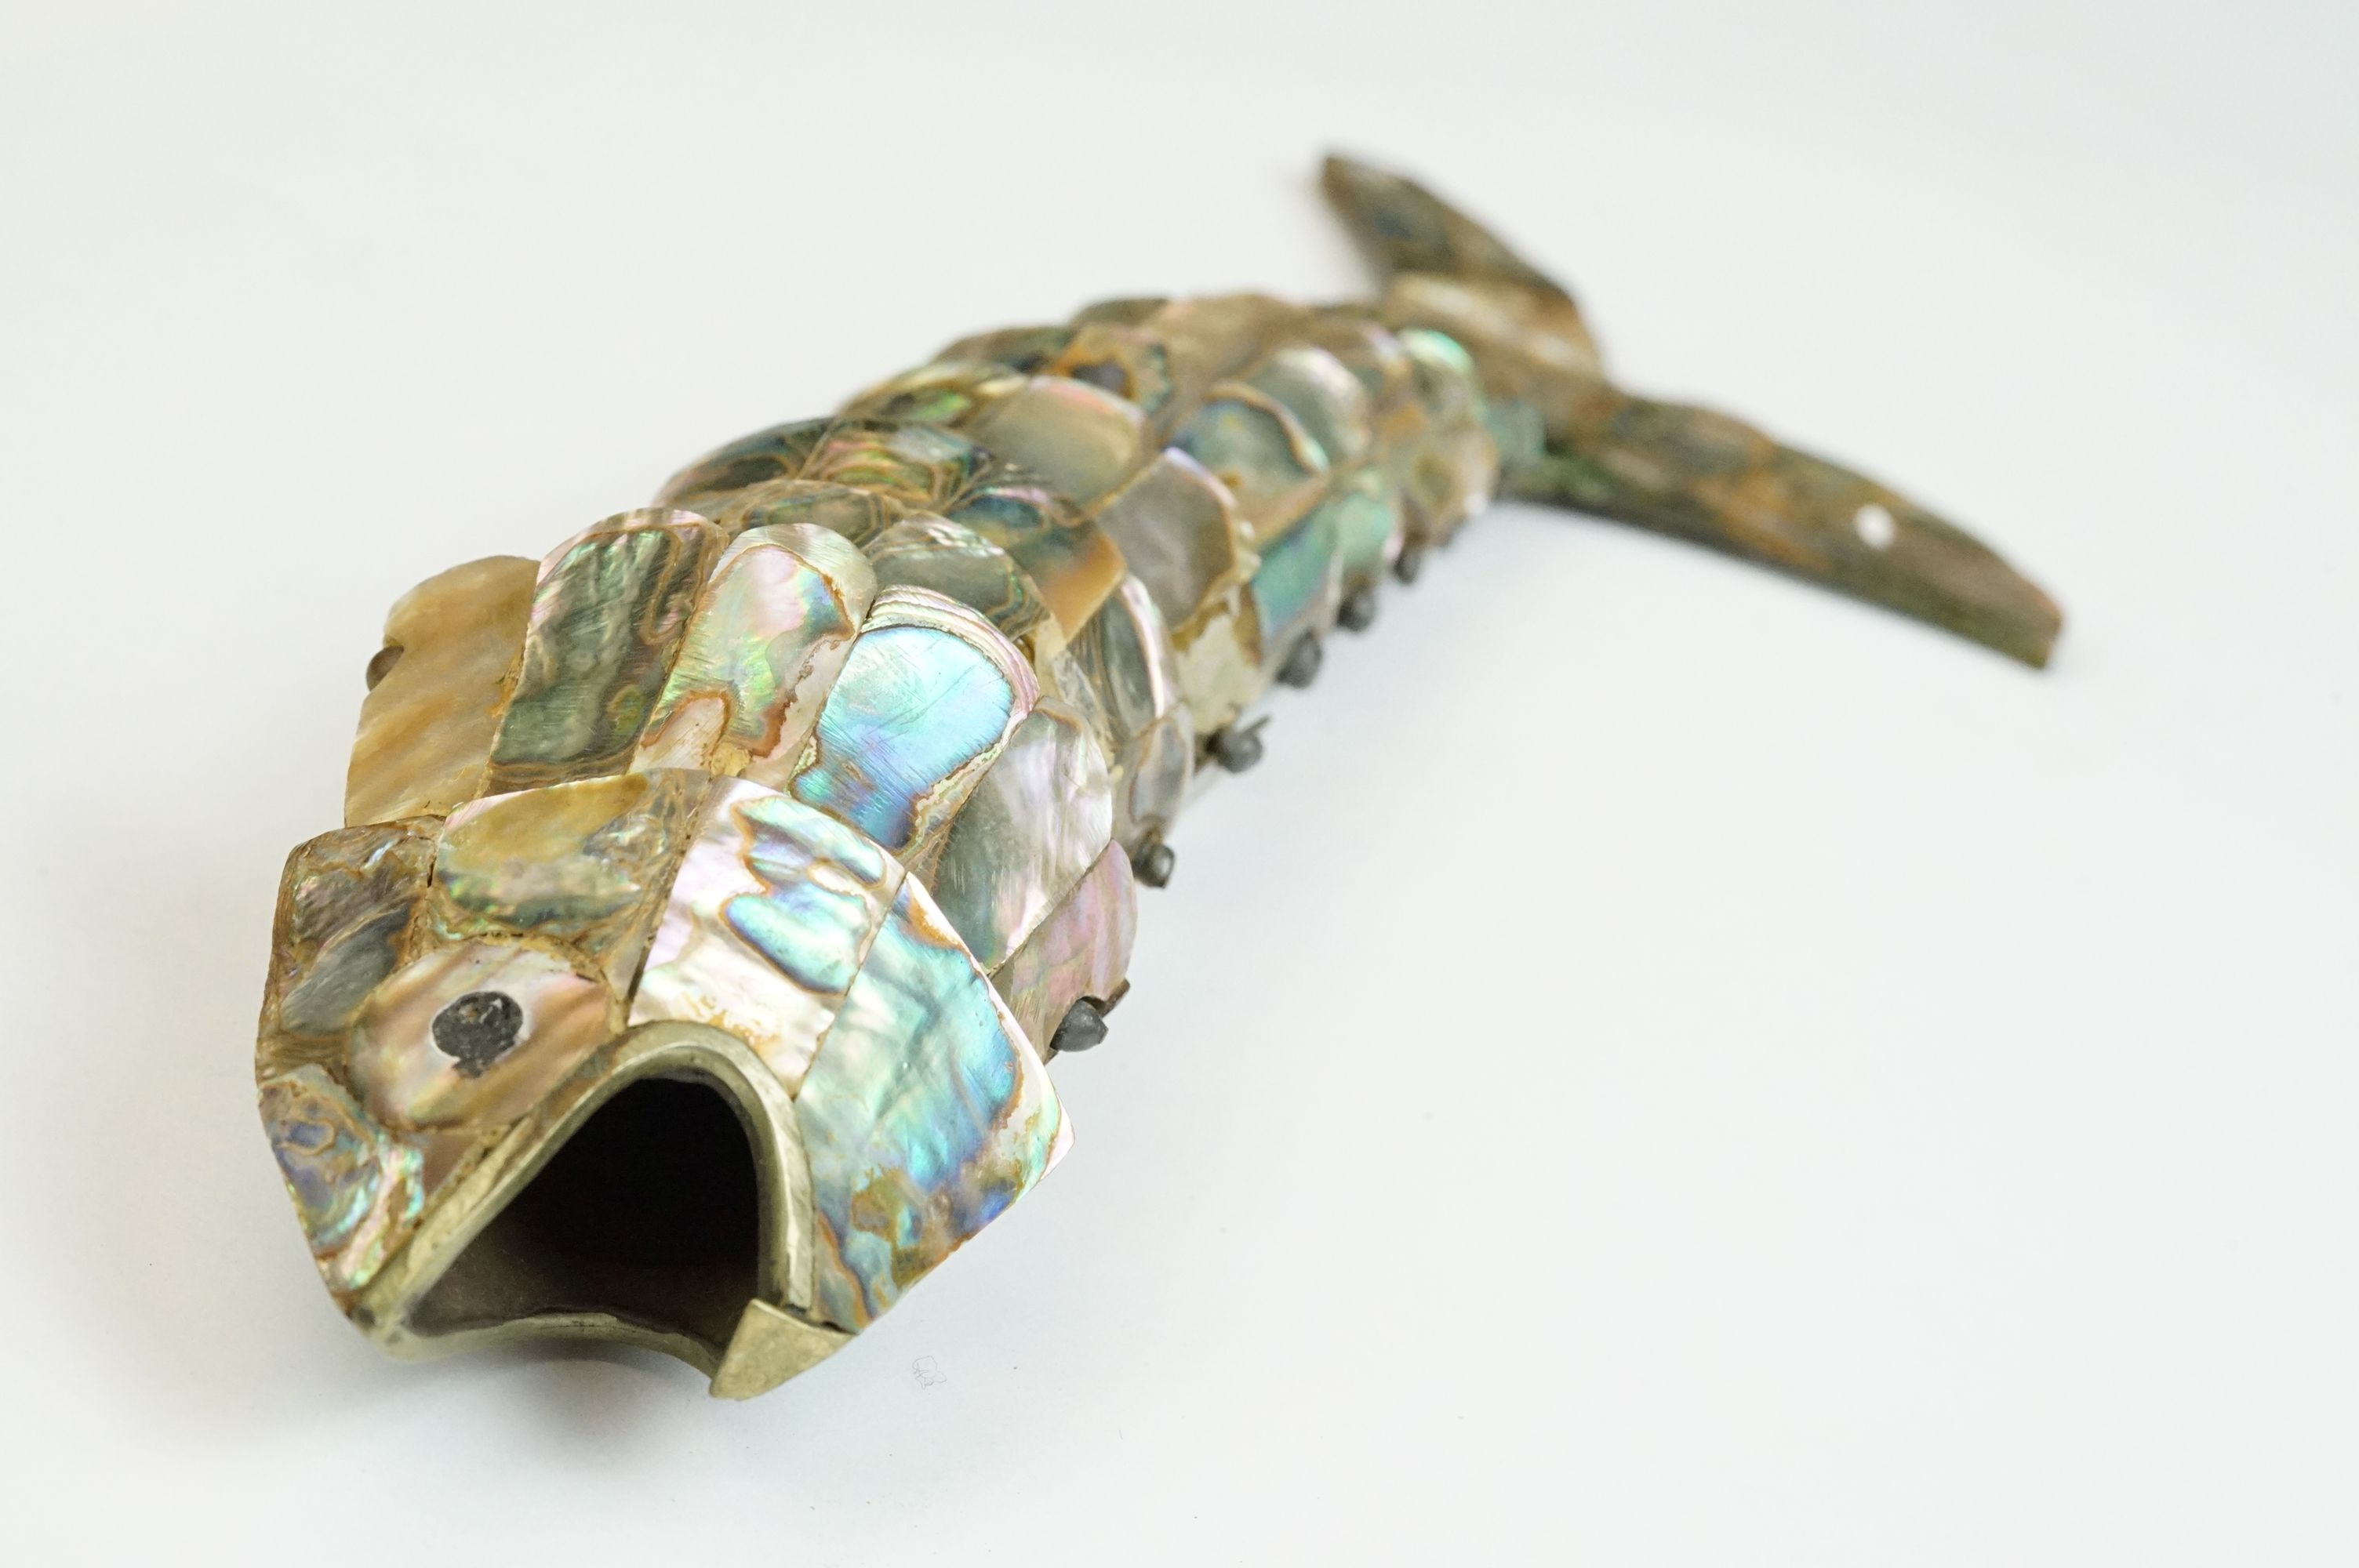 A Large Abalone Articulated Fish Bottle Opener, approx 19cm in length. - Image 5 of 6